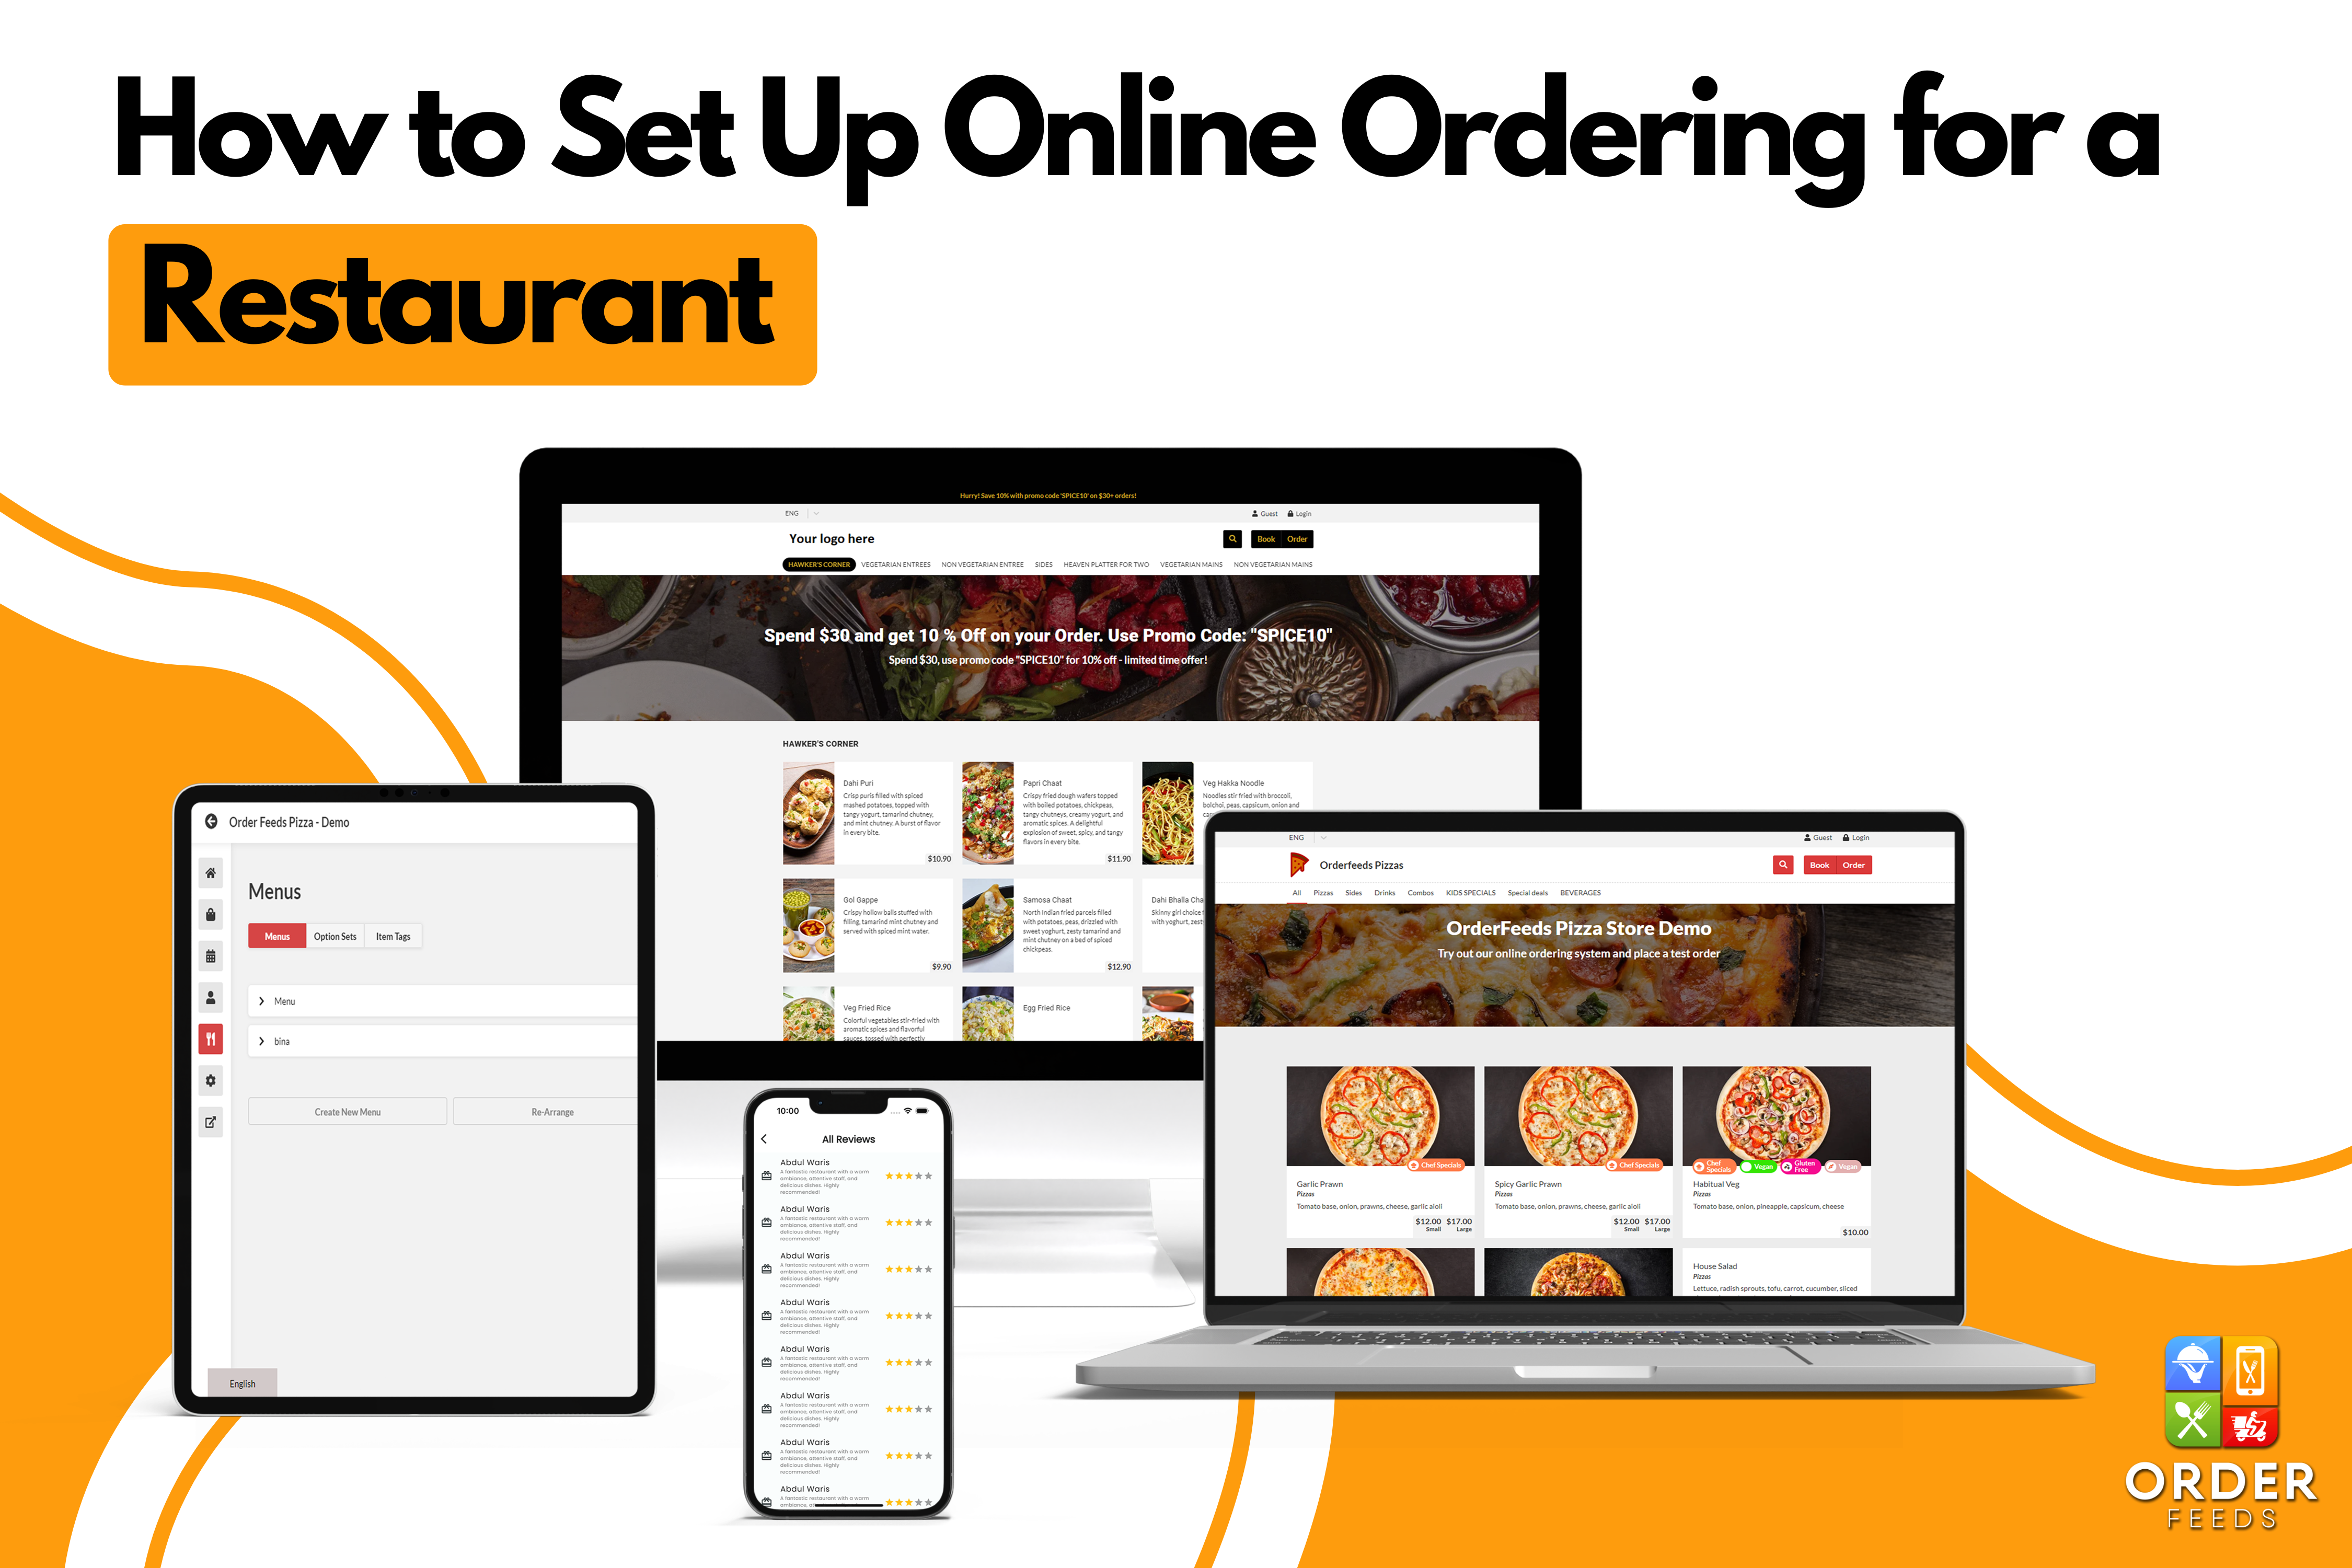 How to Set Up Online Ordering for a Restaurant